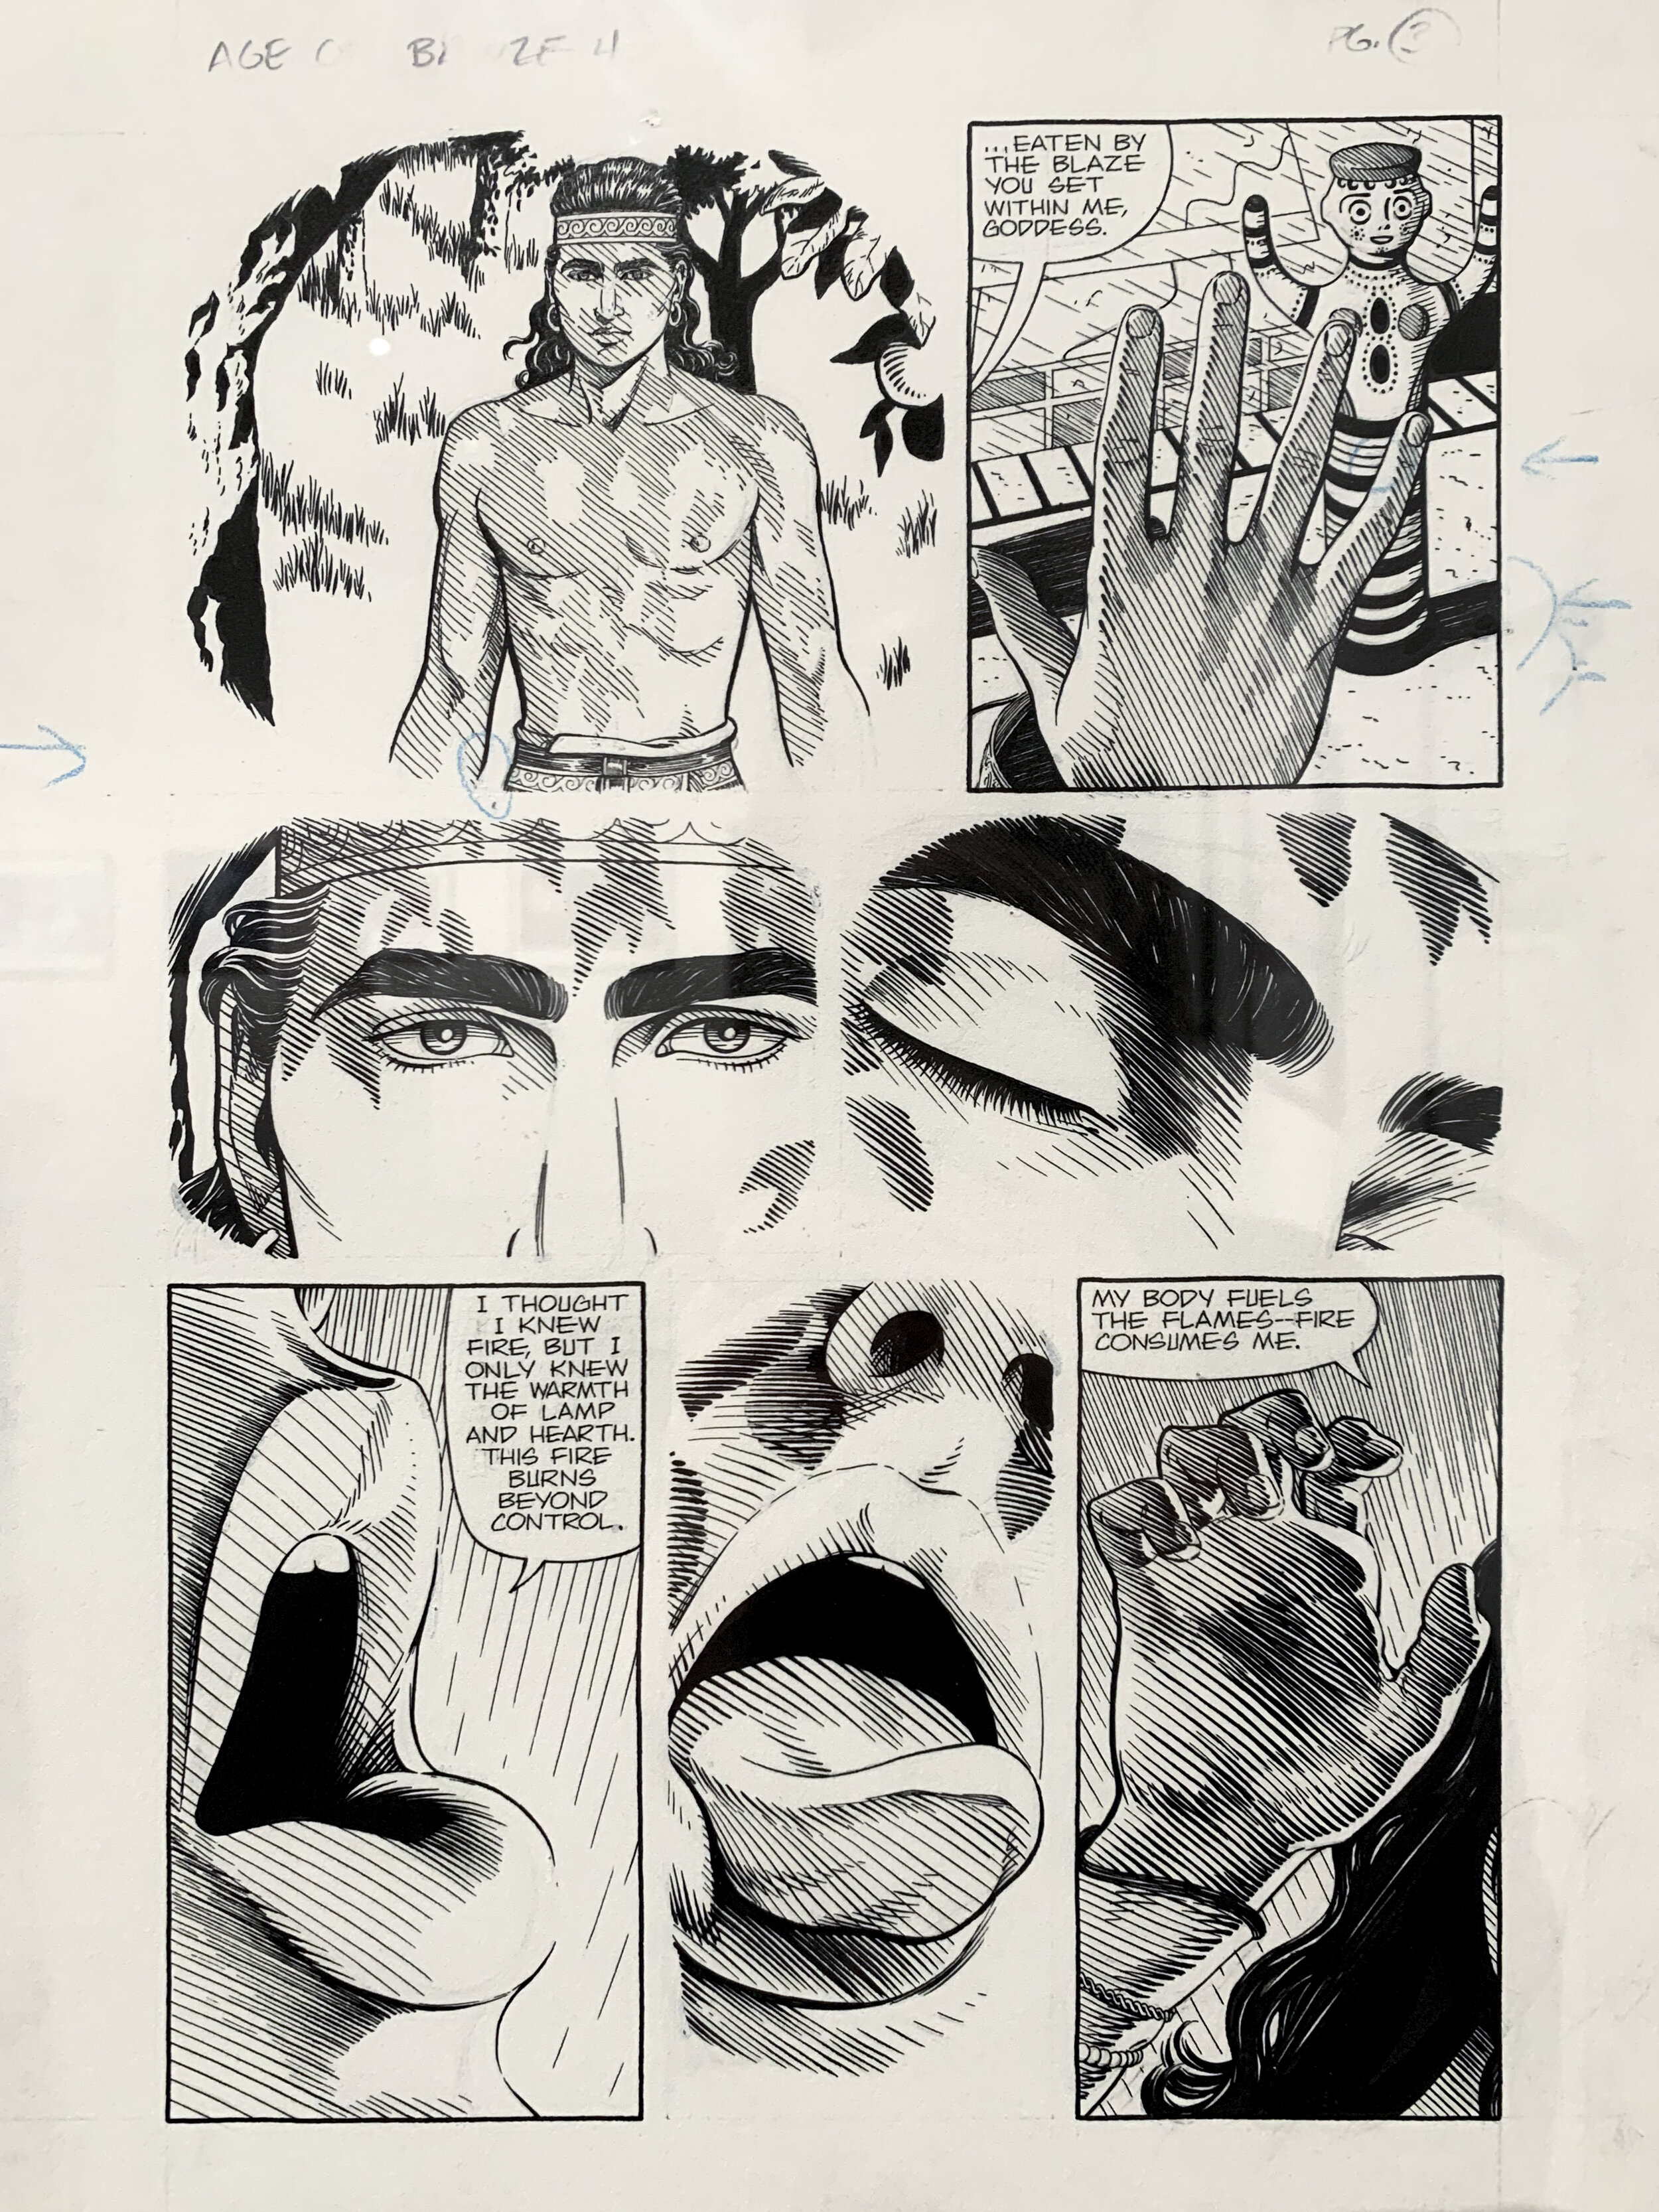   Eric Shanower    AGE OF BRONZE #4 (included in A THOUSAND SHIPS)   published by Image Comics, May 1999. pp. 3, 1999  pen and india ink on Bristol board, notes in pencil 